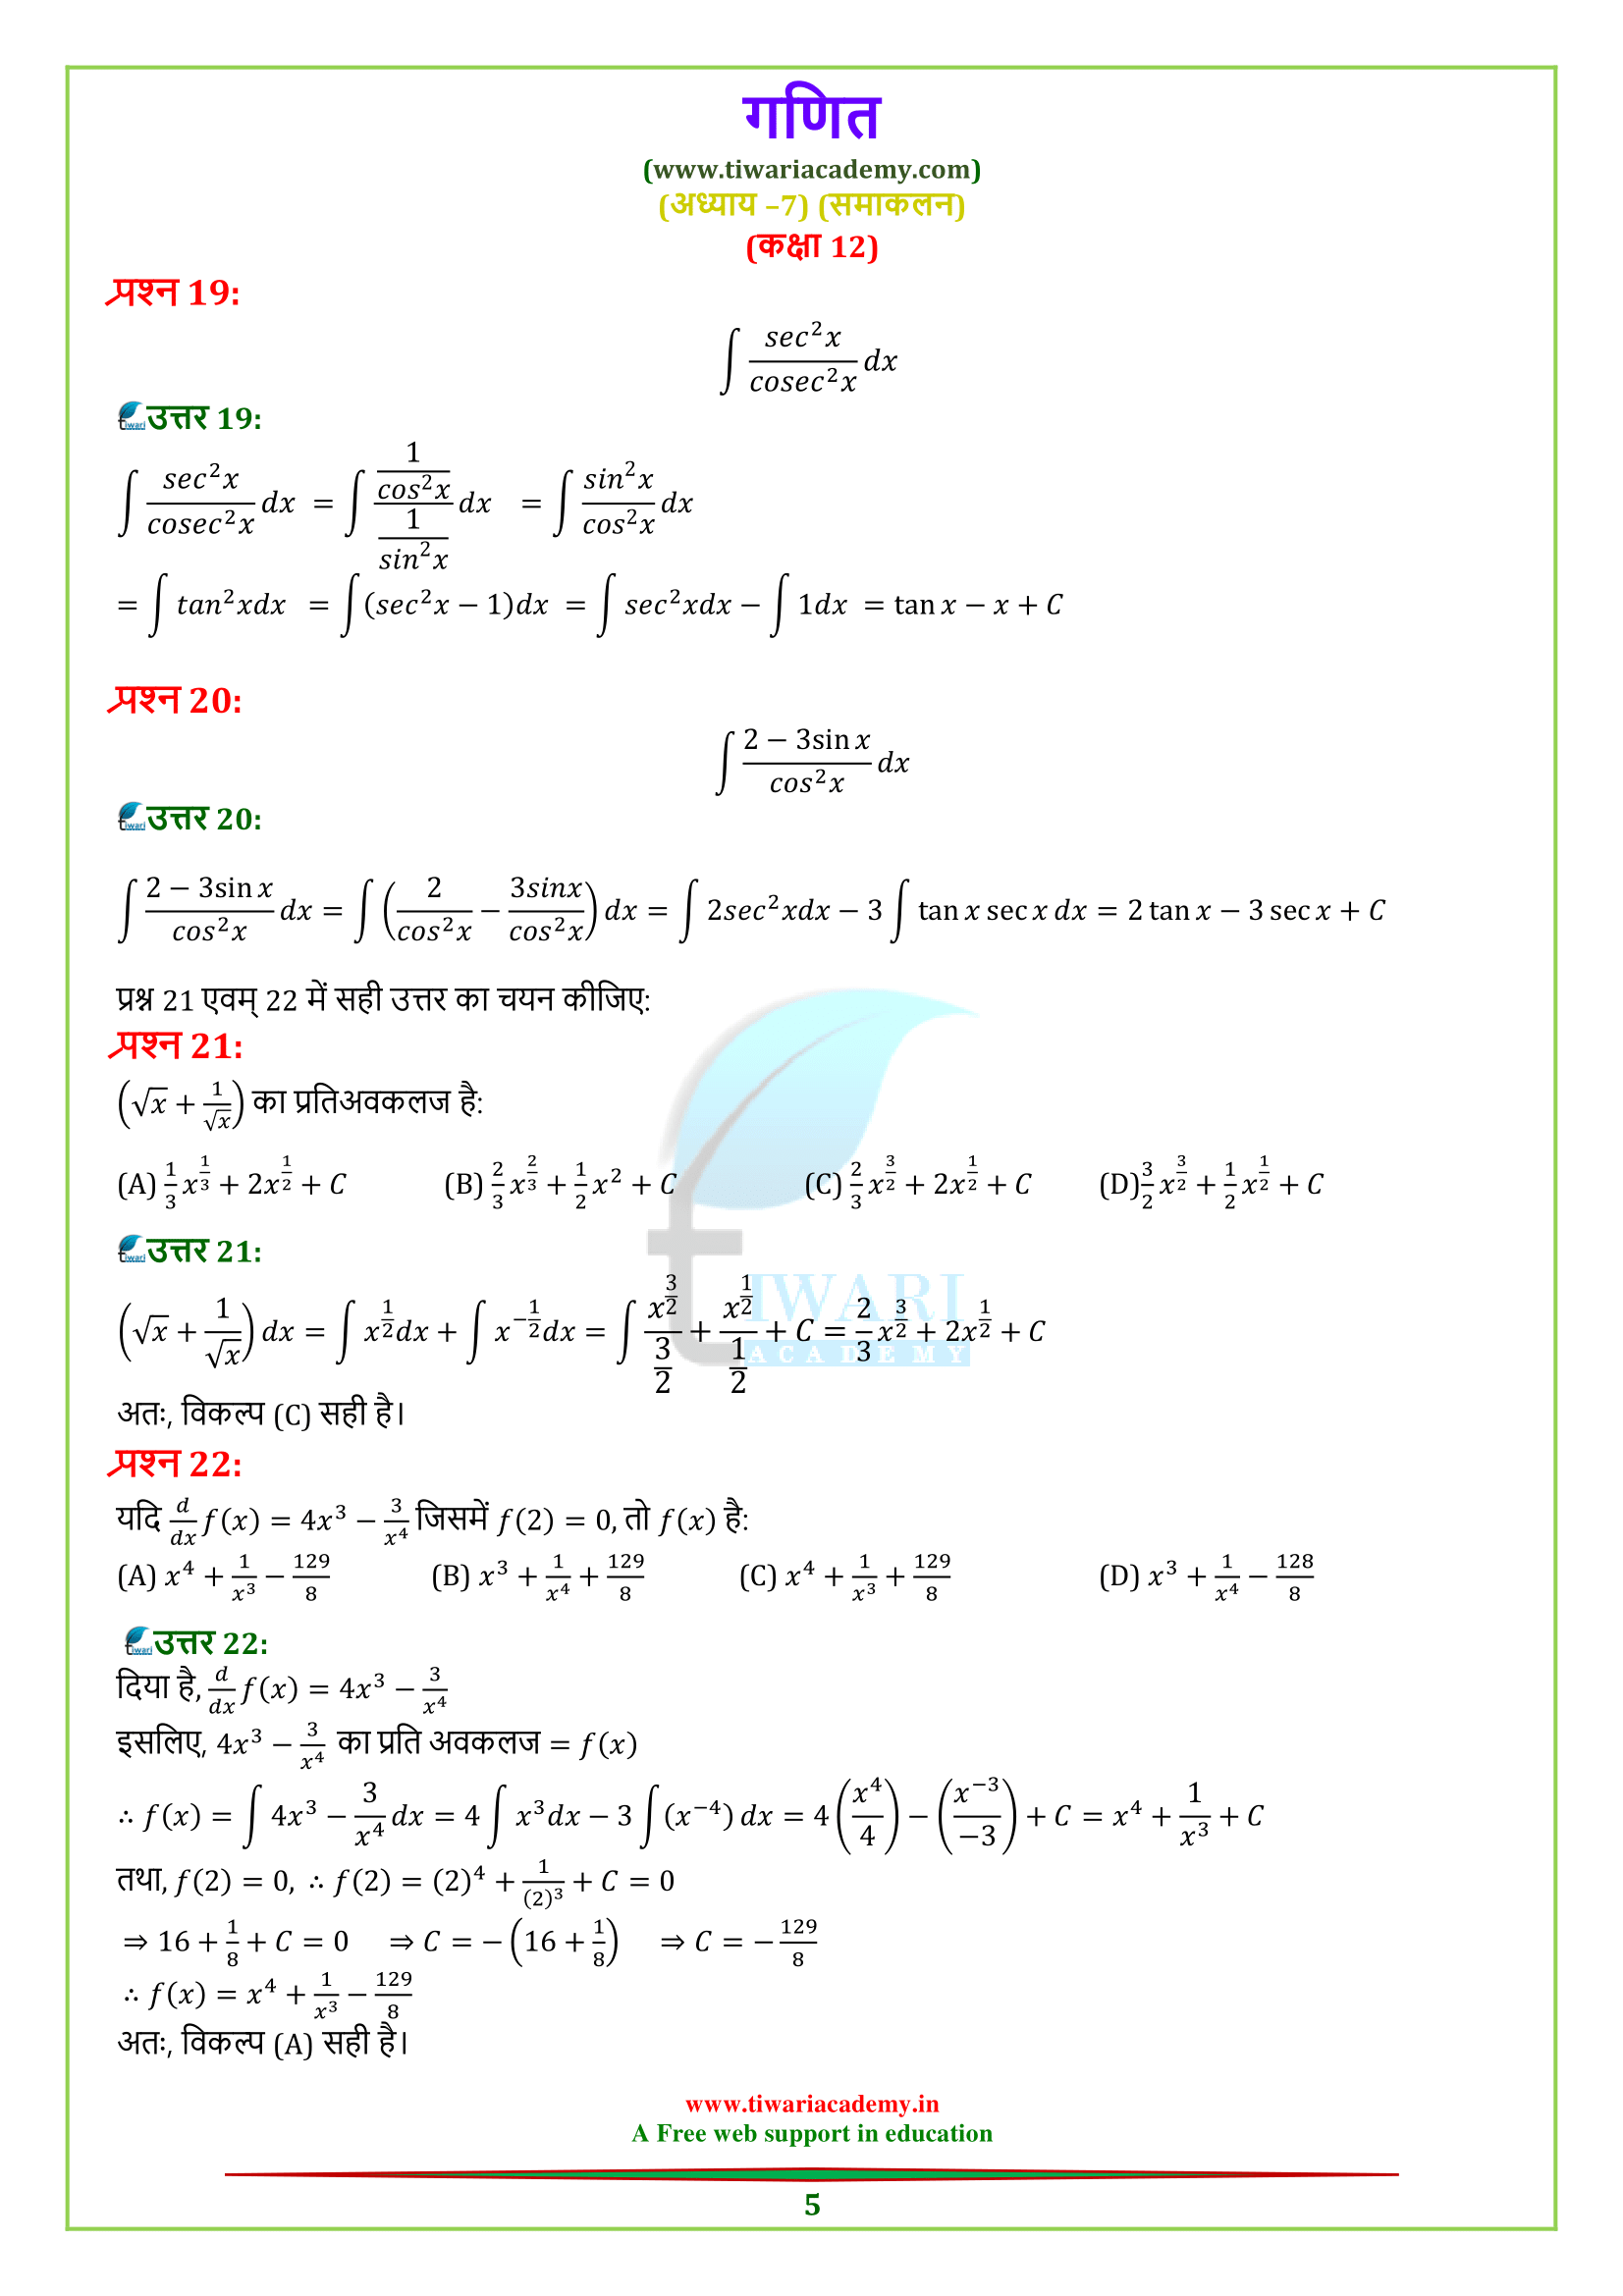 Exercise 7.1 integration